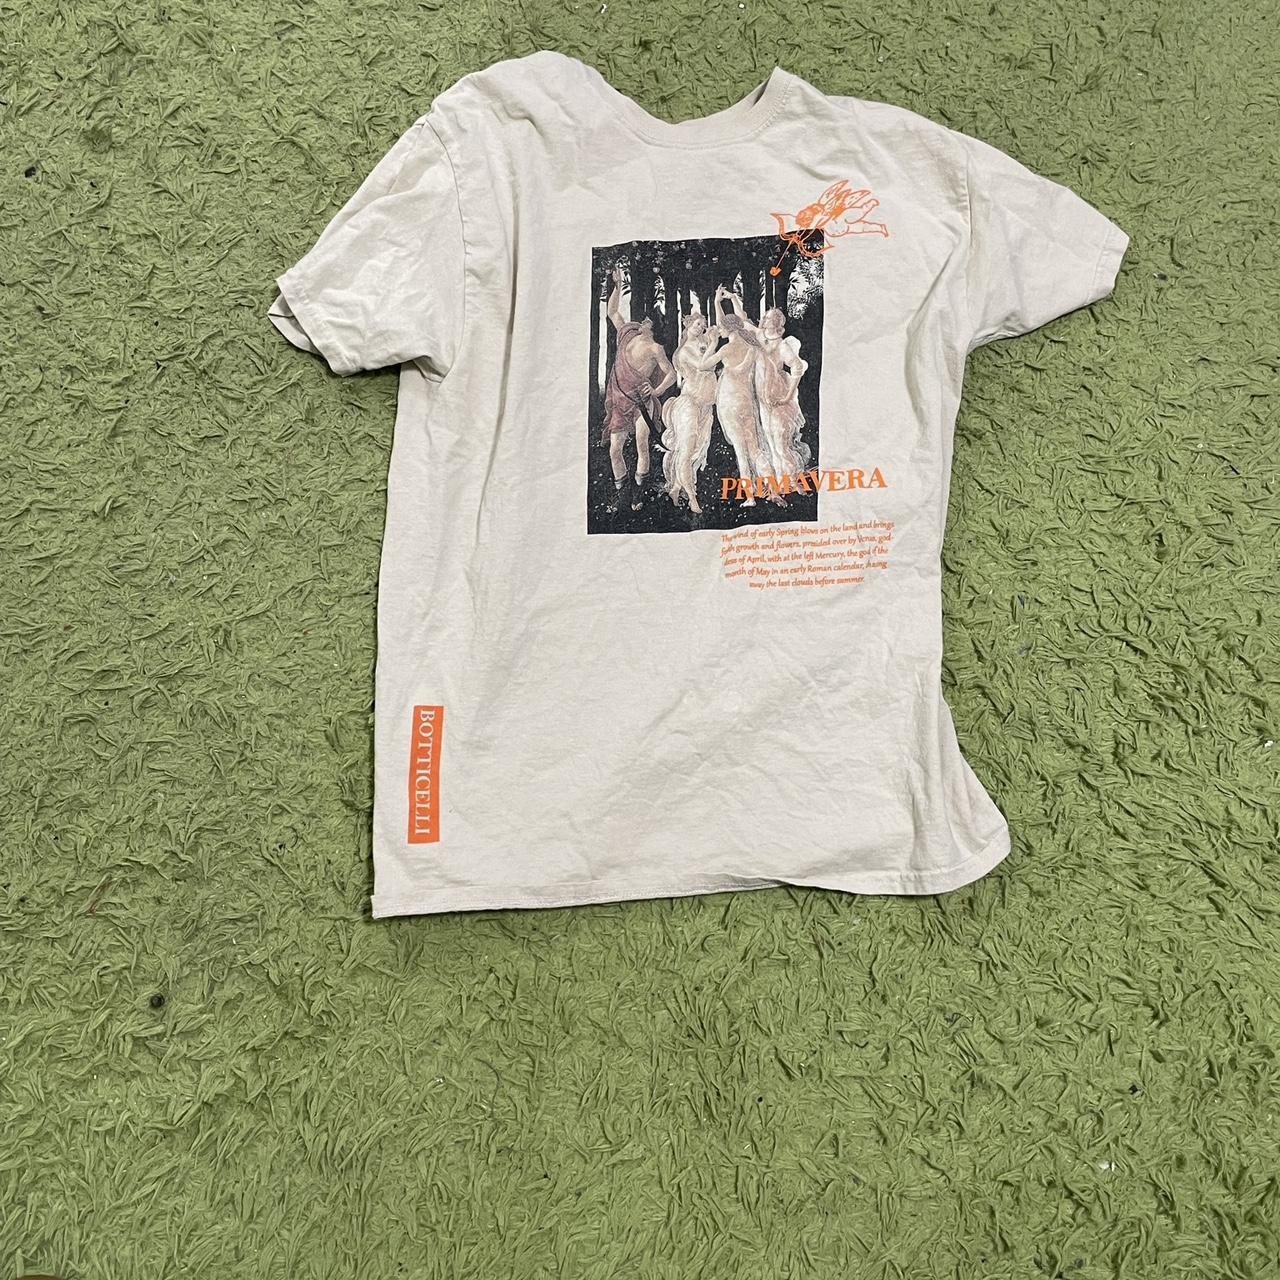 Urban Outfitters Men's Cream and Orange T-shirt